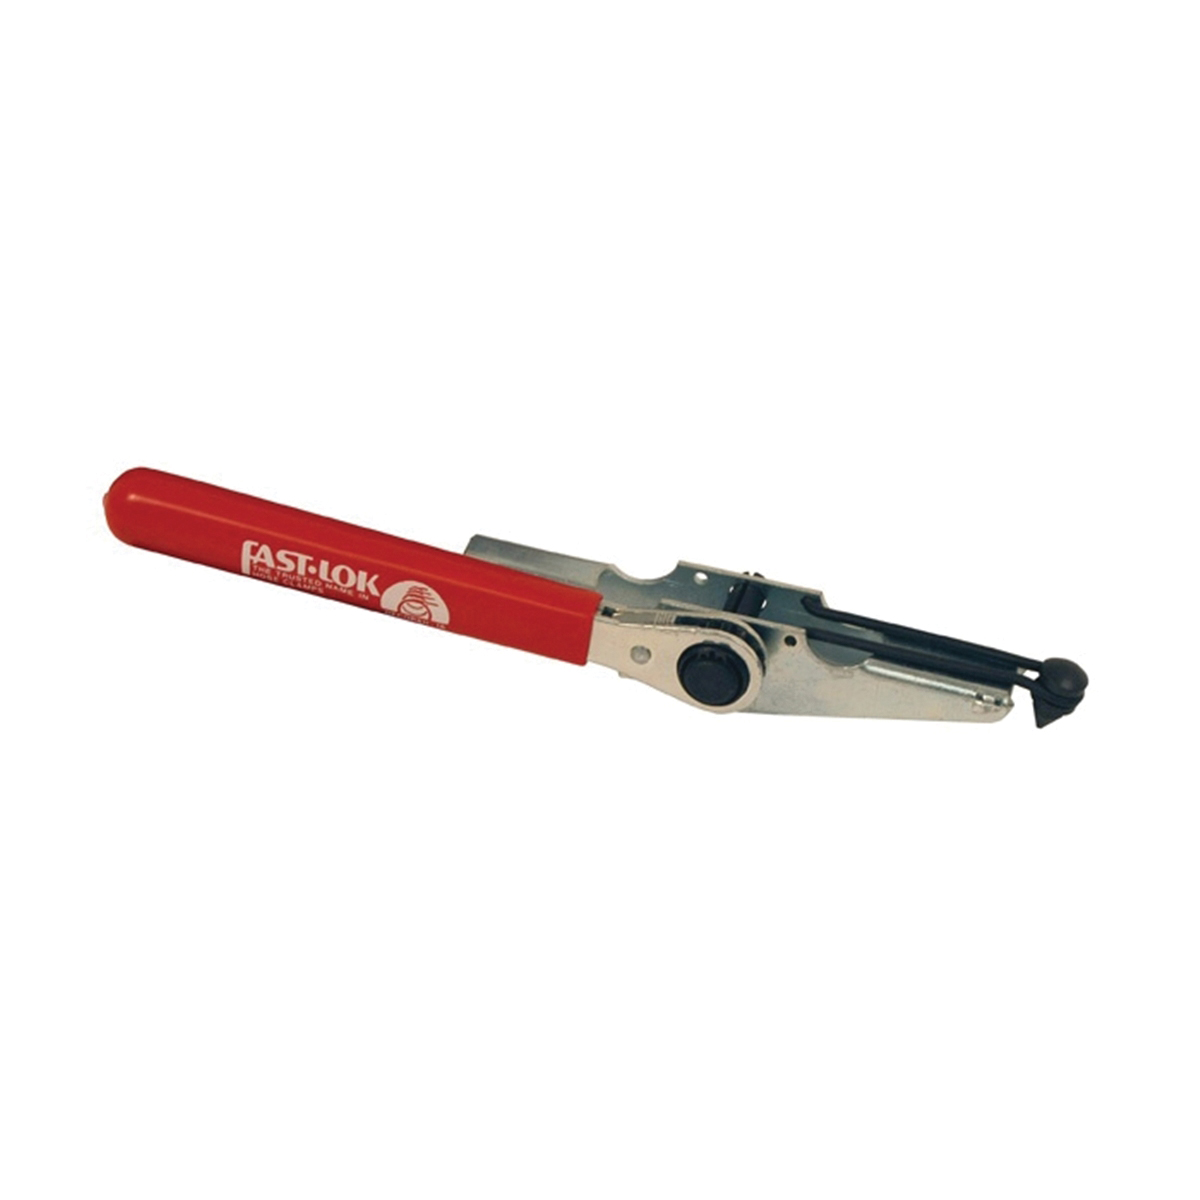 Approved Supplier U204739 Portable Locking Band Clamp Hand Tool